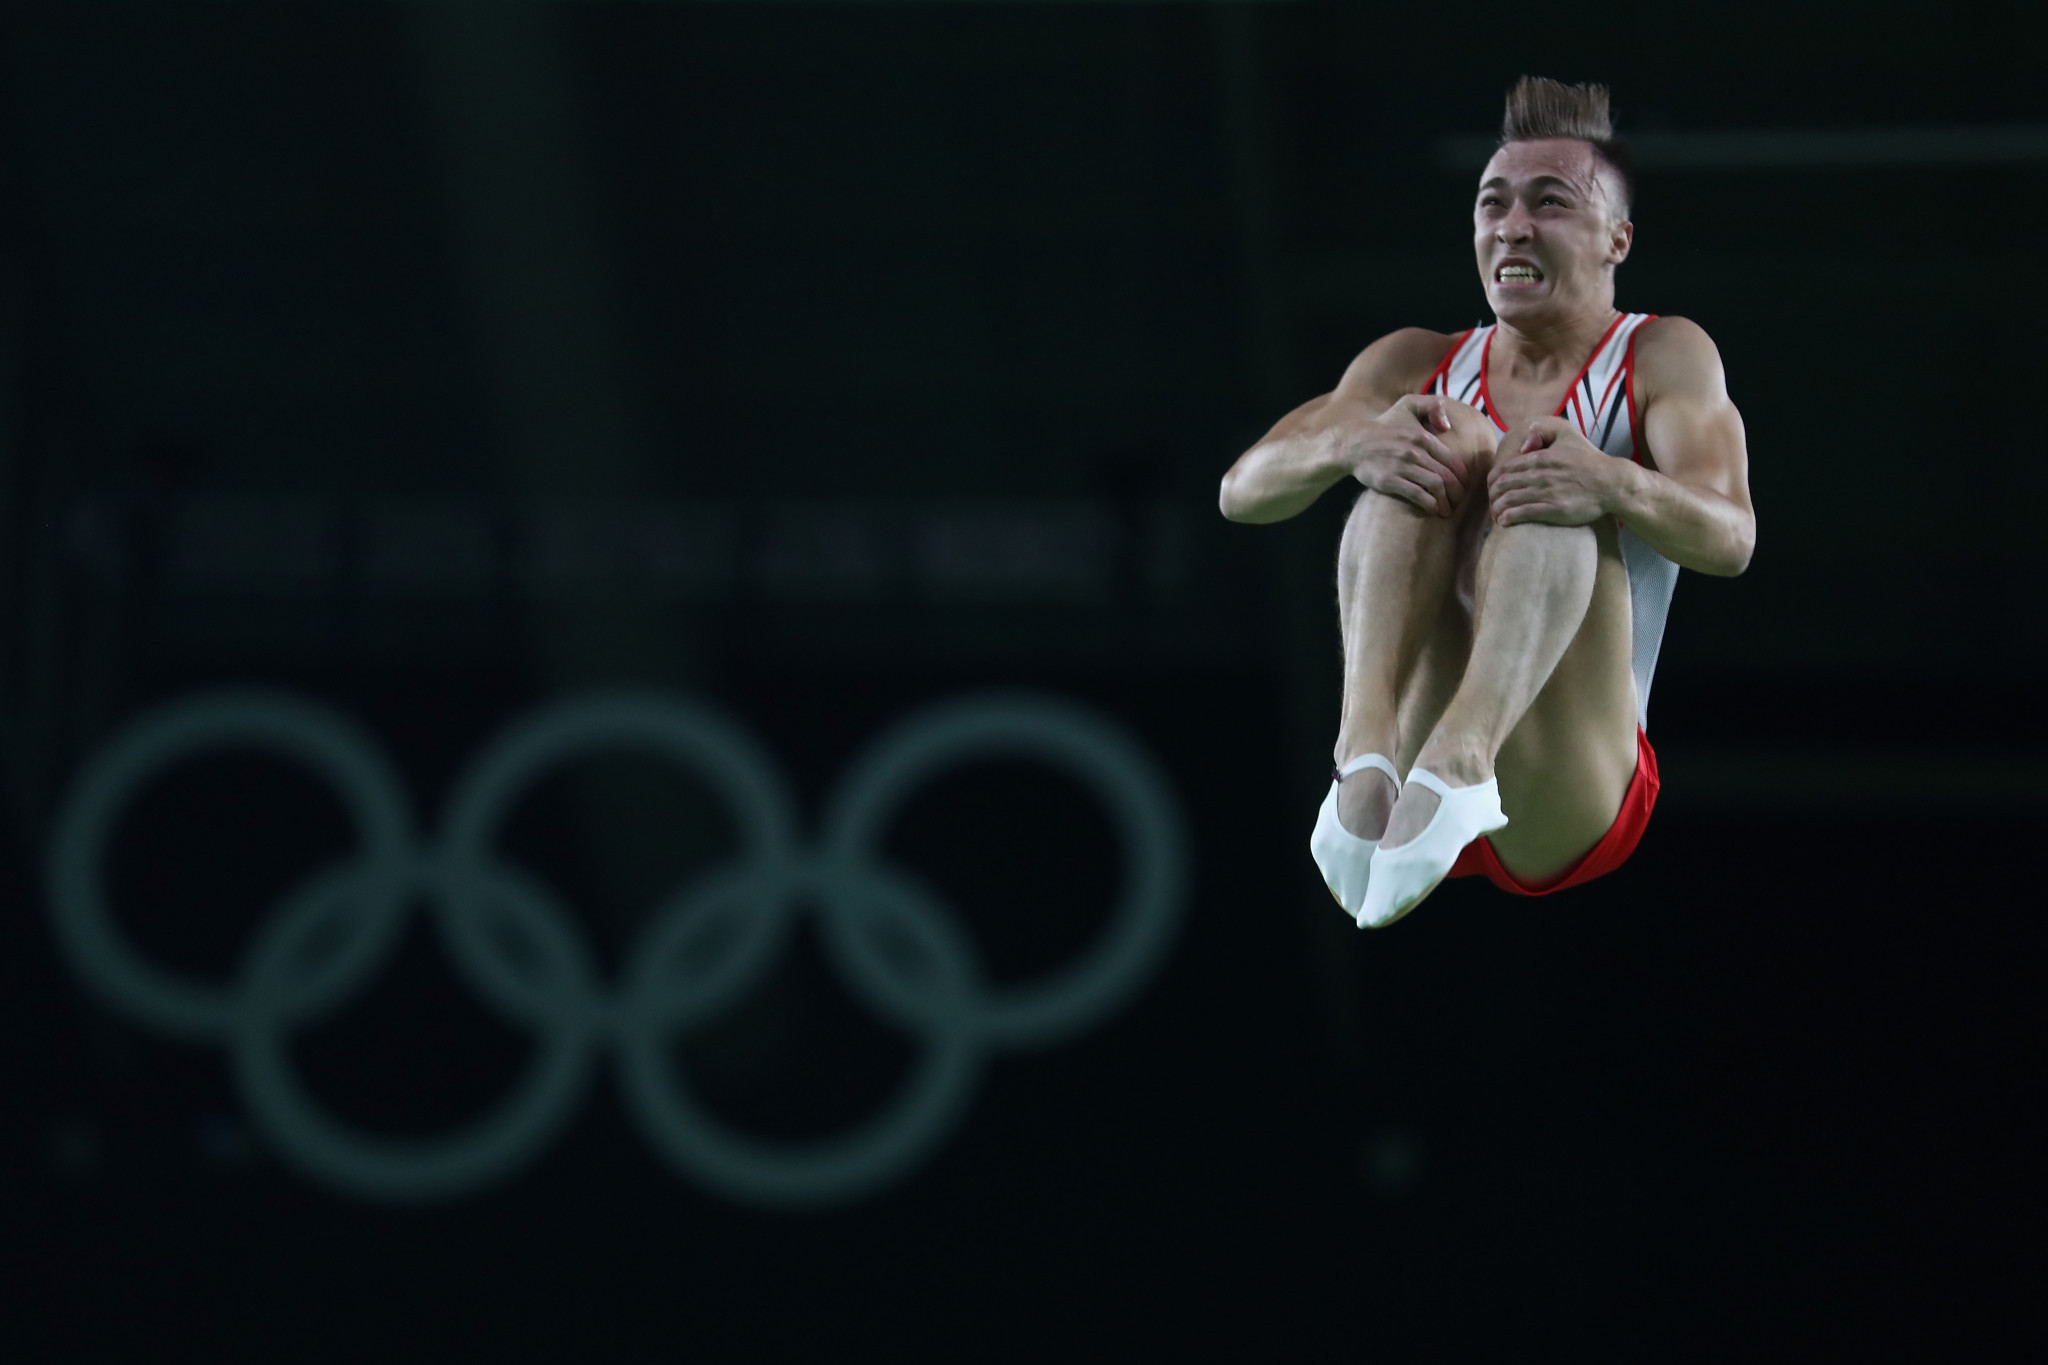 Belarus' Uladzislau Hancharou added to his Olympic gold medal with victory at the FIG Trampolne World Cup in Arosa ©Getty Images